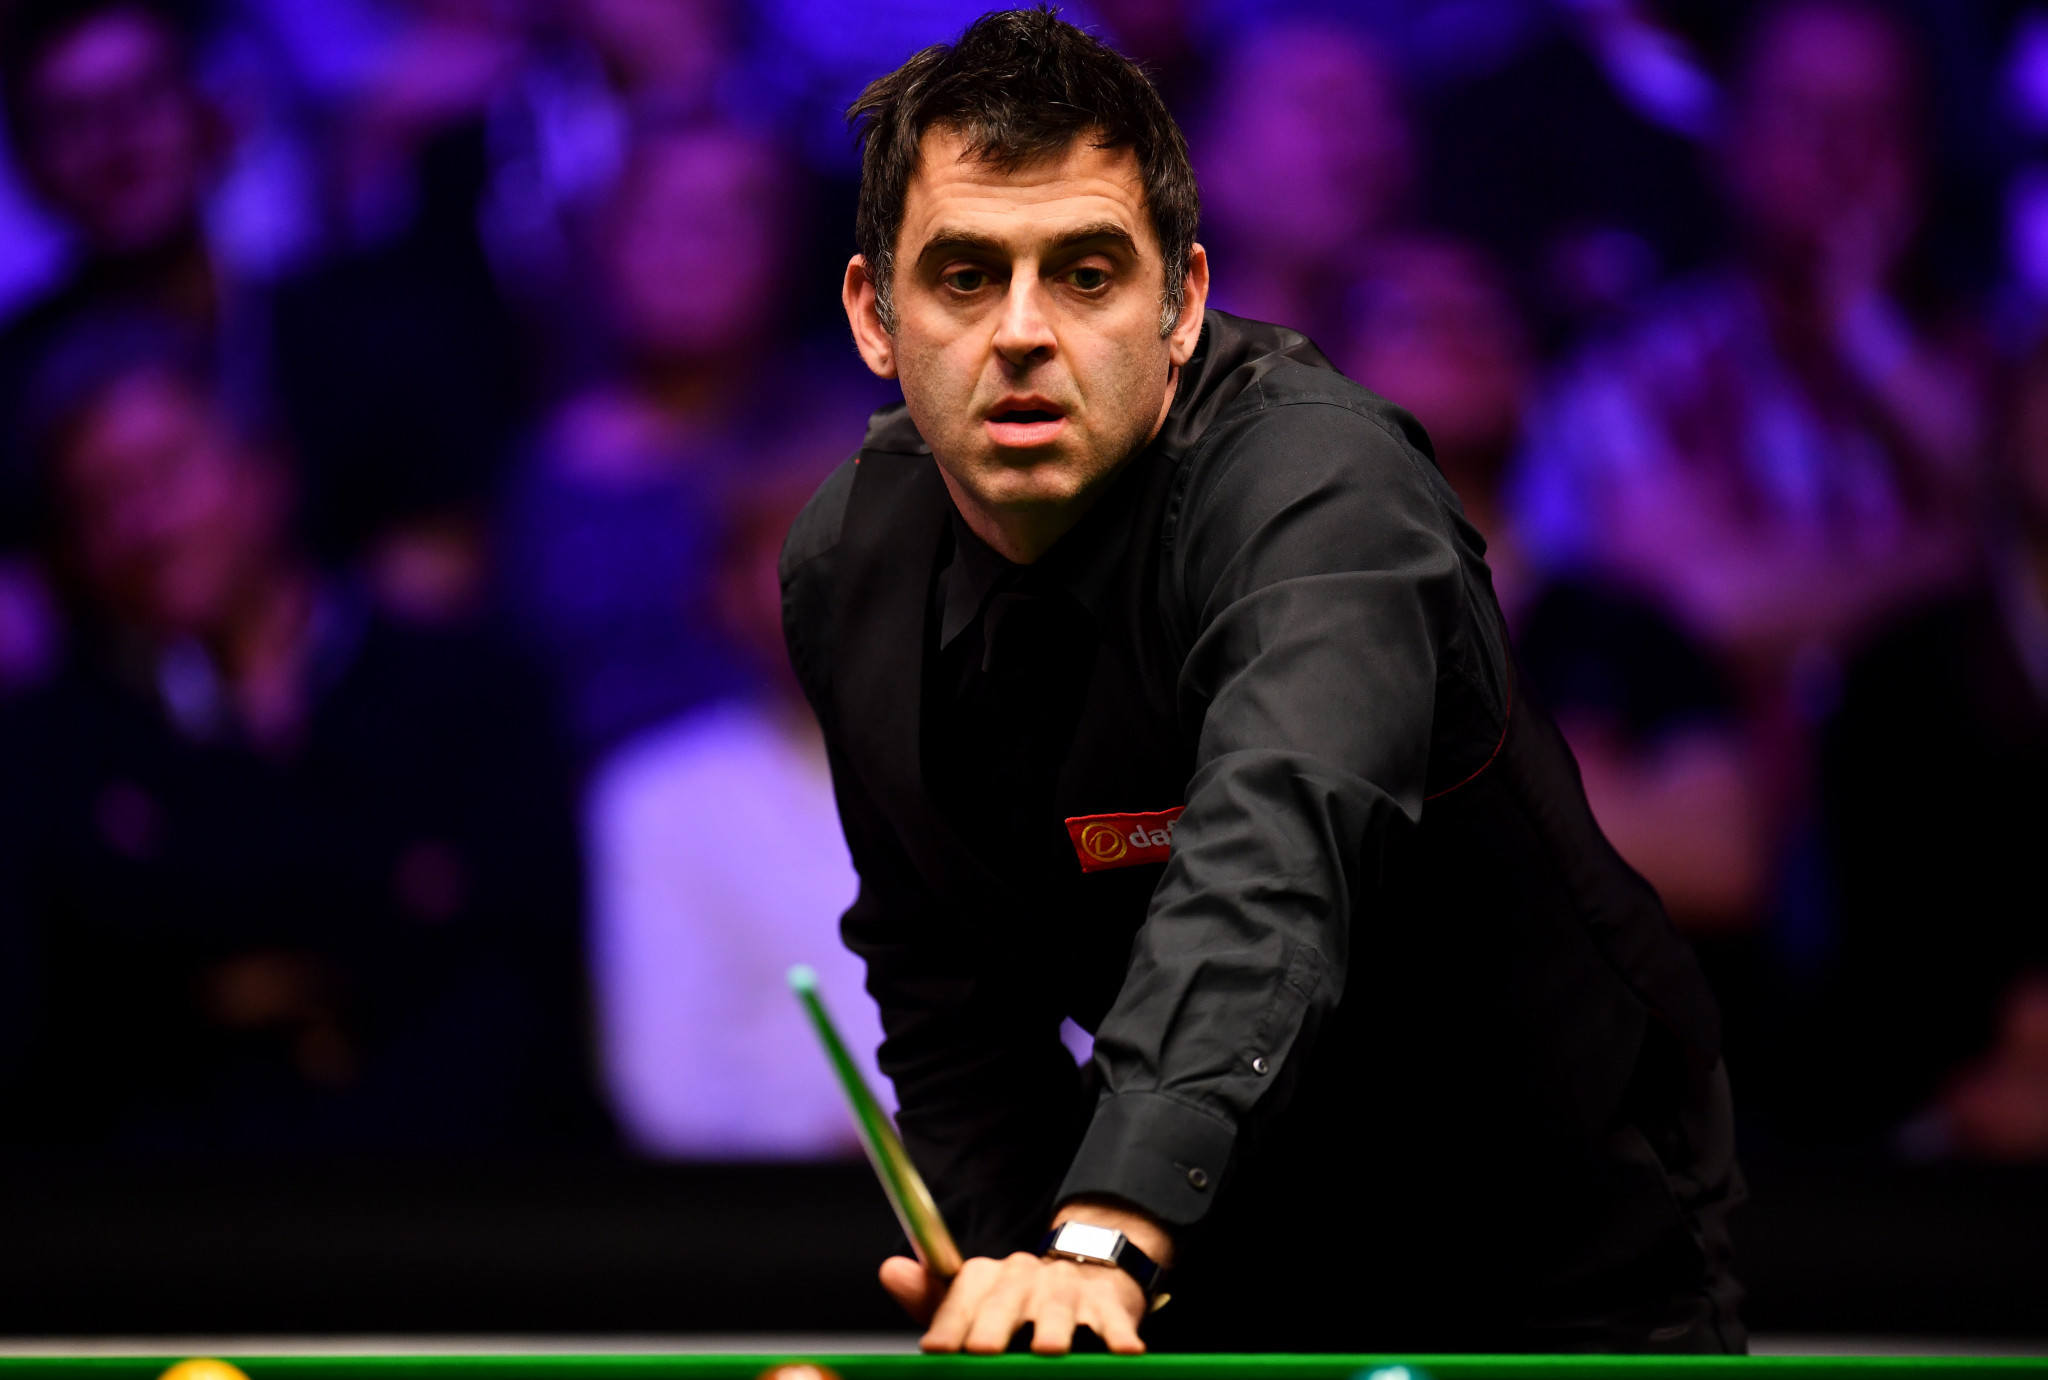 Ronnie O'Sullivan is also facing the prospect of an early exit as he is 6-3 down to Stephen Maguire ©Getty Images